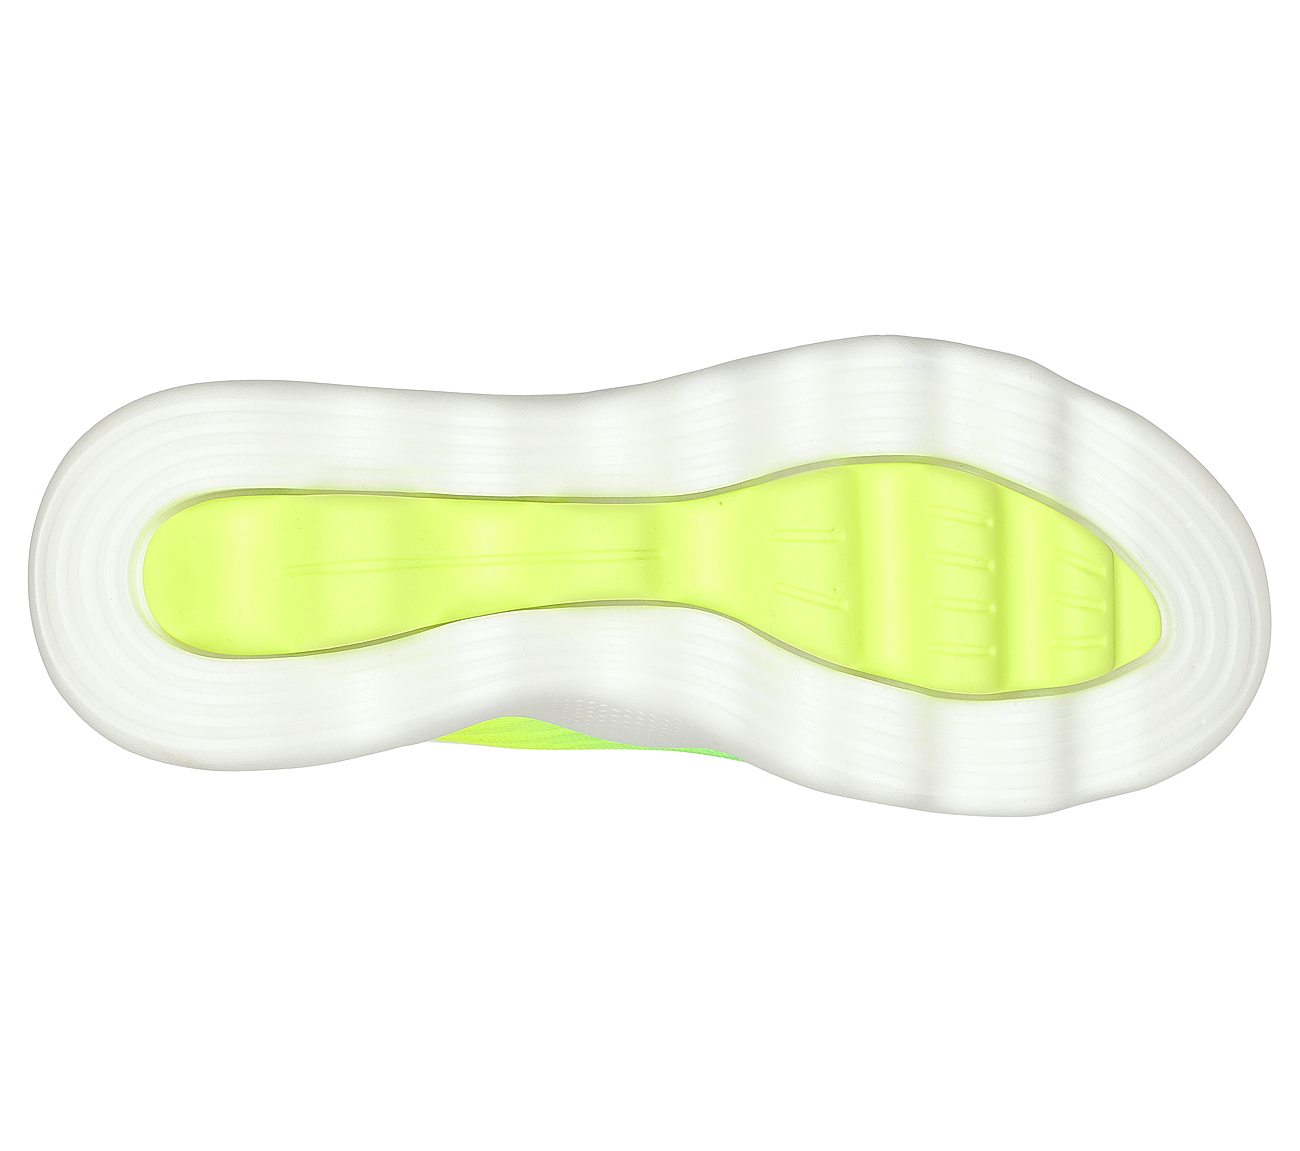 GO WALK MASSAGE FIT, TURQUOISE/LIME Footwear Bottom View